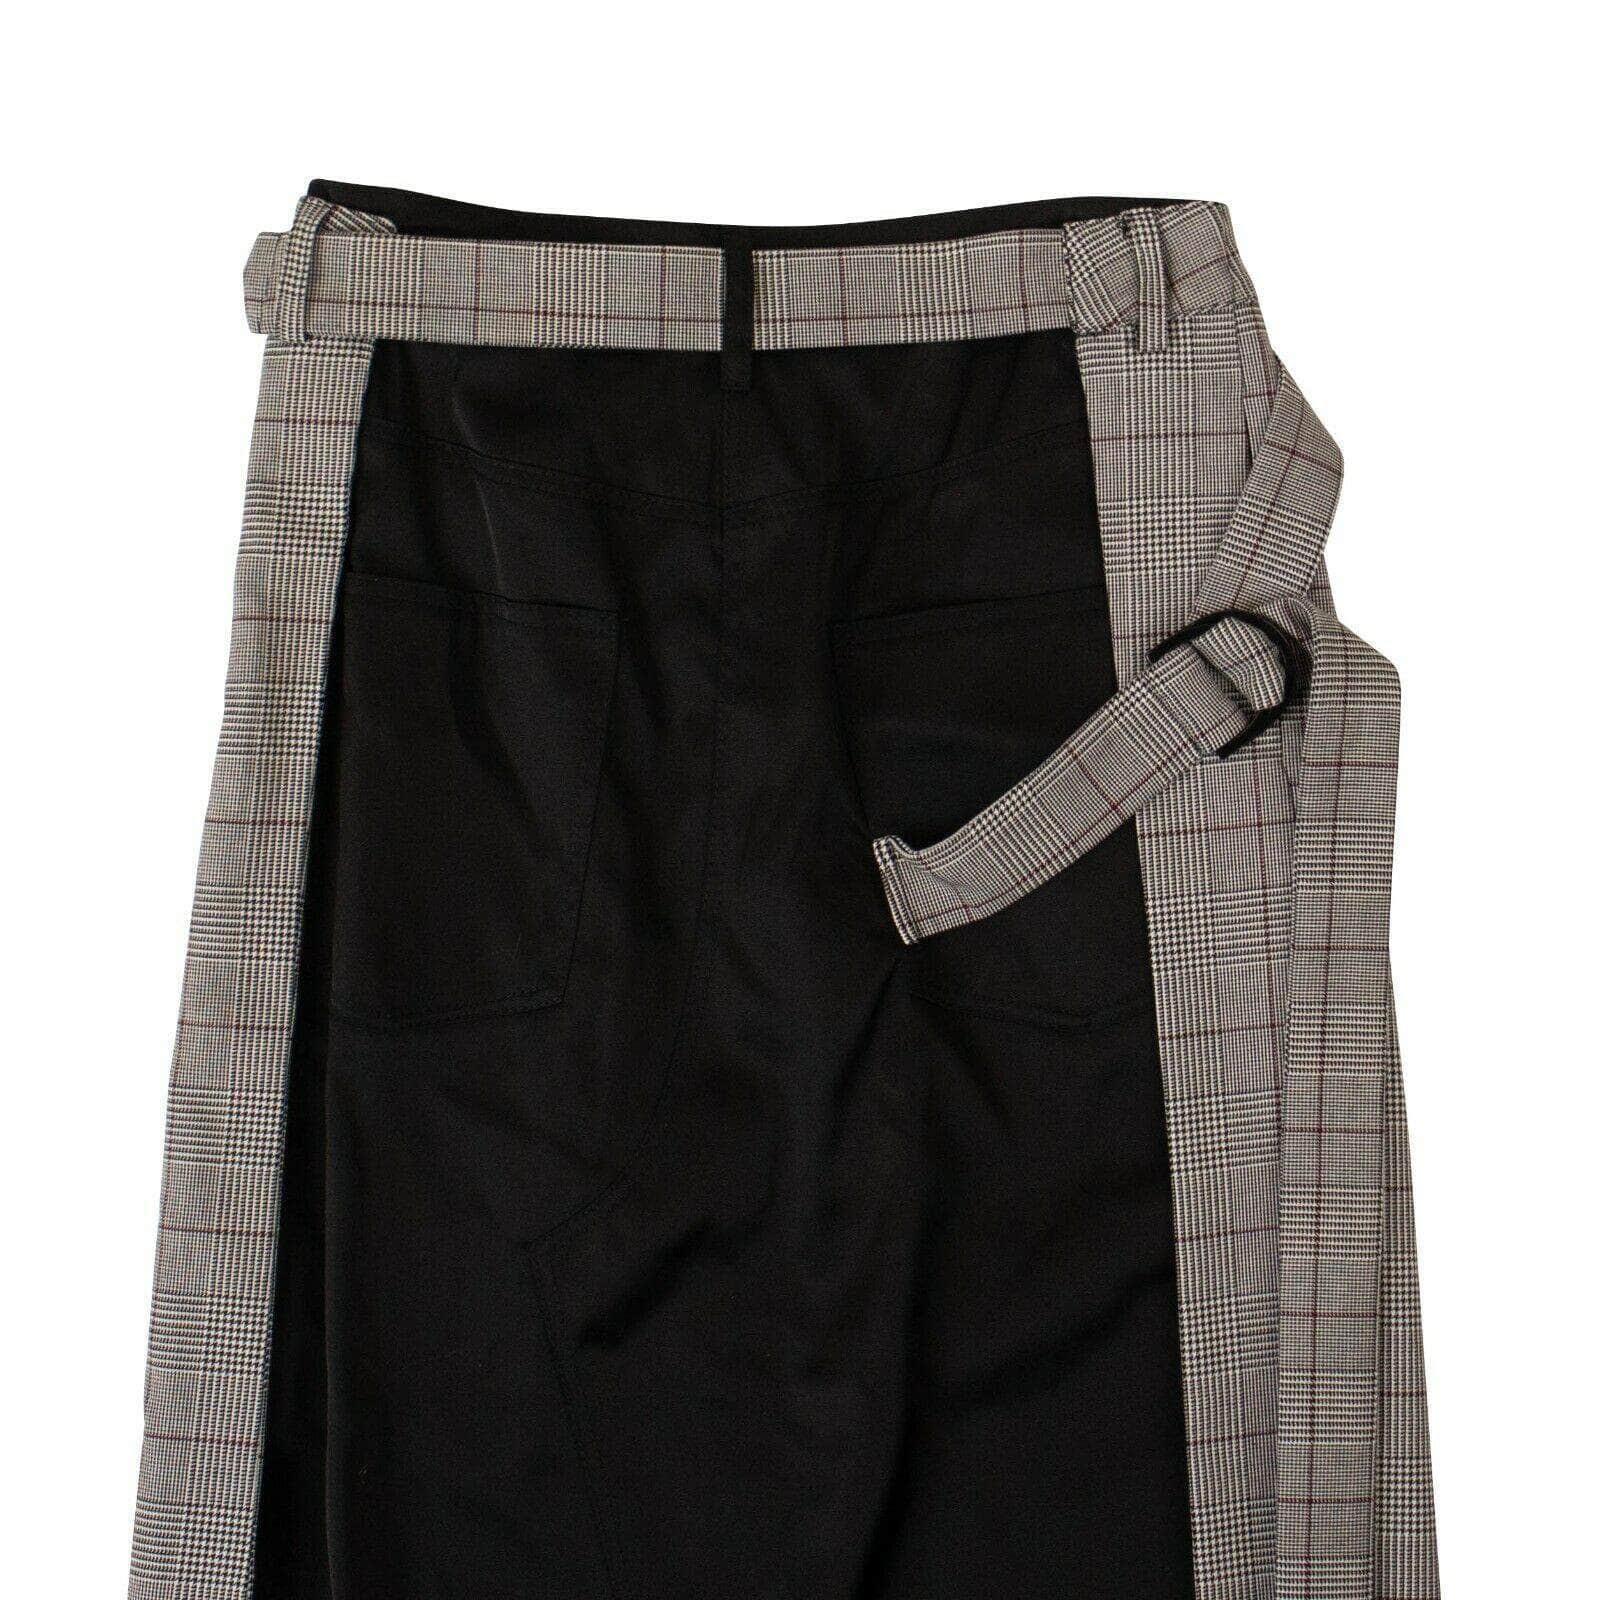 UNRAVEL PROJECT 250-500, channelenable-all, couponcollection, gender-womens, main-clothing, sale-enable, size-38, size-40, unravel-project 38 Grey Check Pattern Hybrid Midi Skirt 82NGG-UN-1121/38 82NGG-UN-1121/38